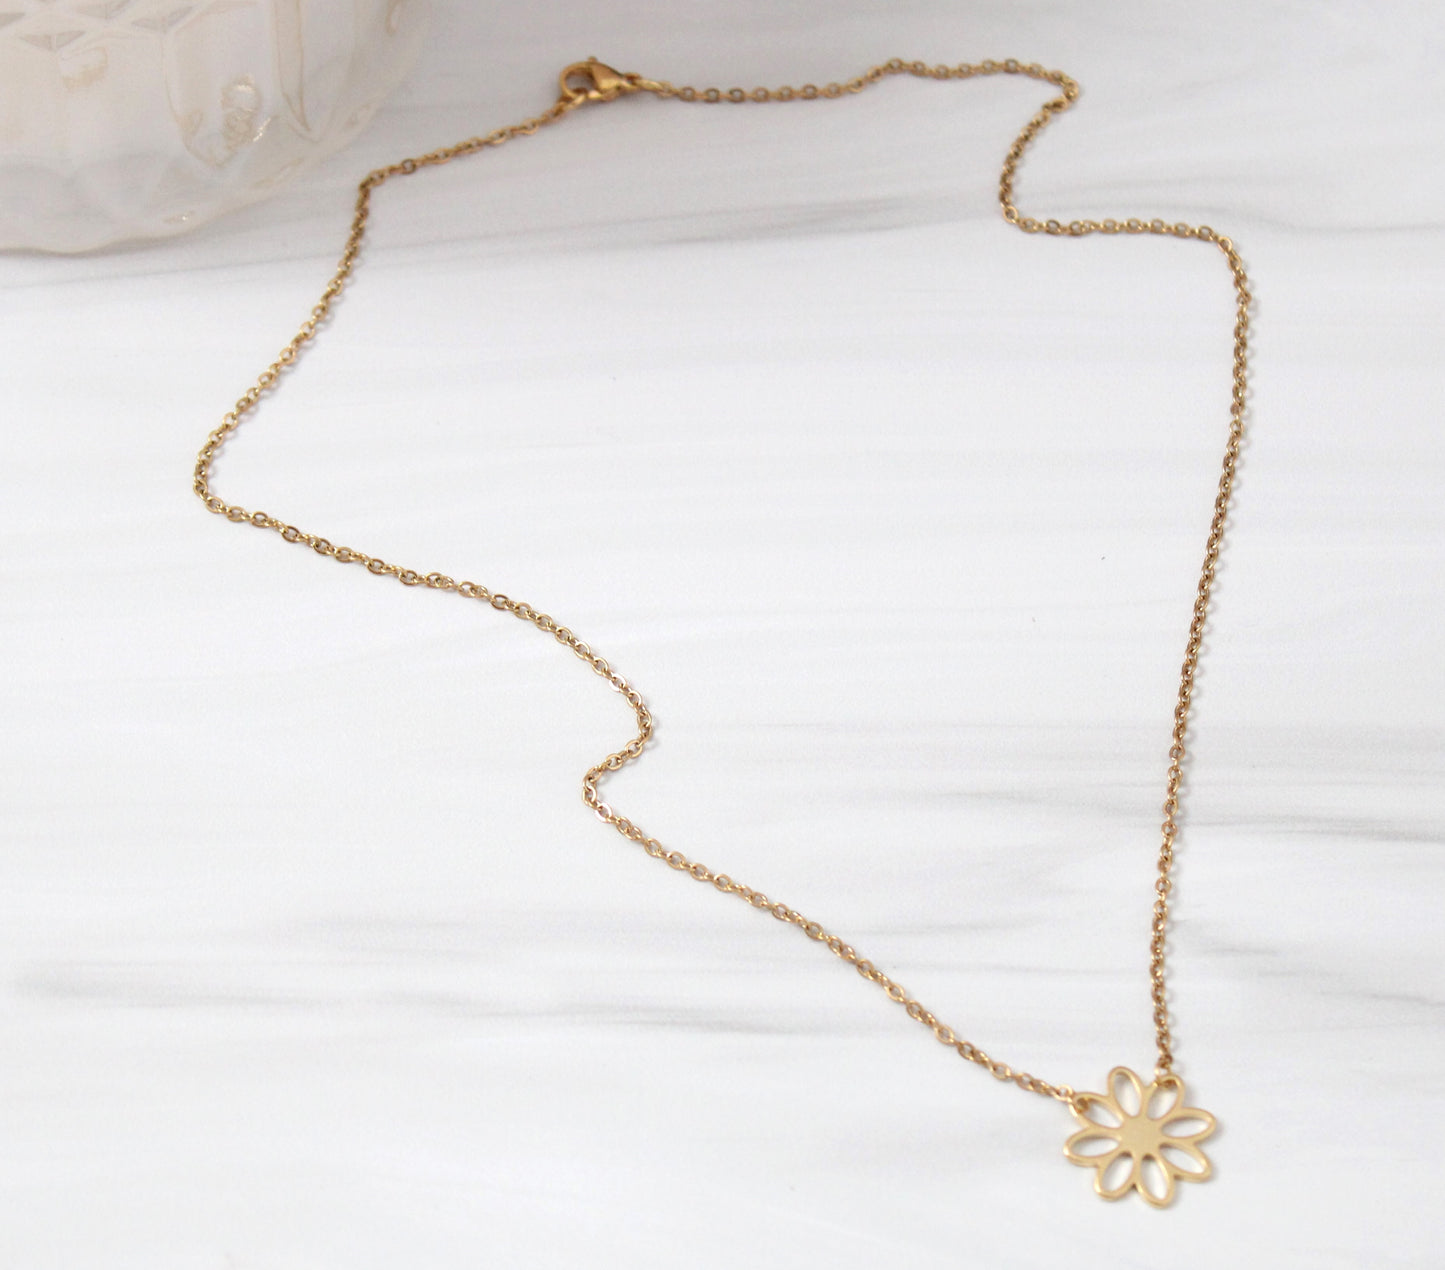 Bloom Flower Necklace in Gold